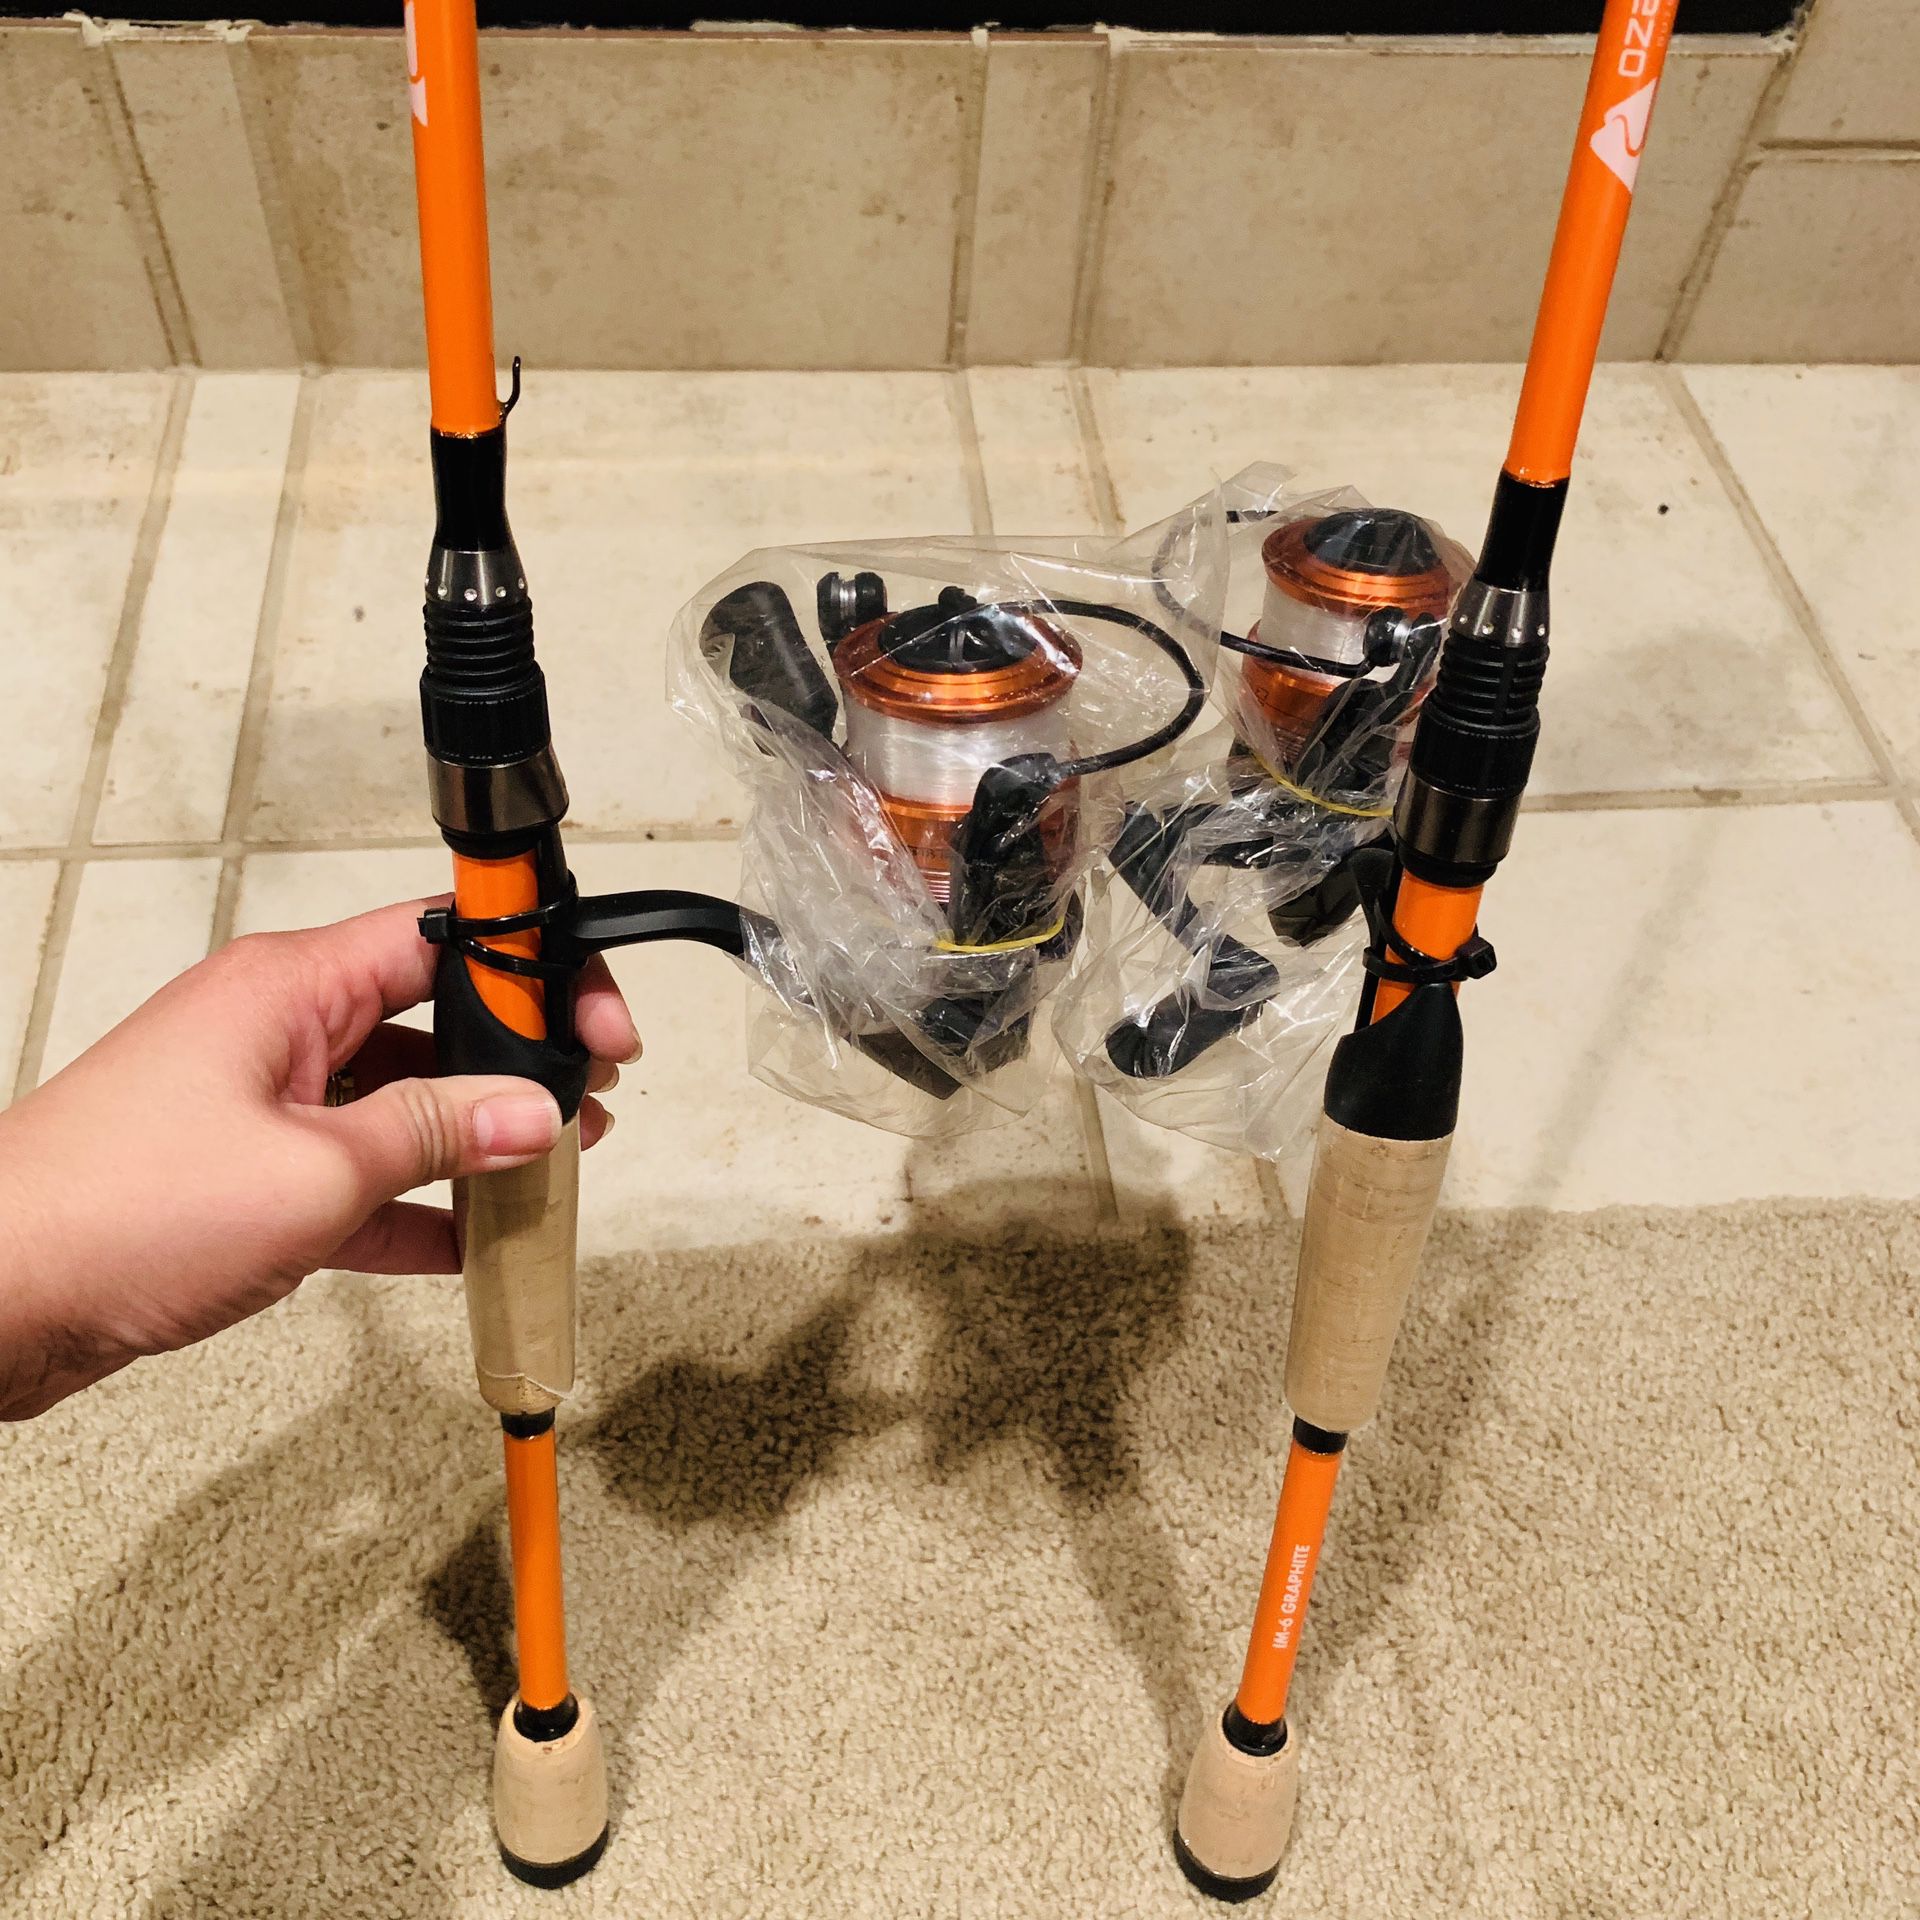 Fishing Pole for Sale in Niles, MI - OfferUp